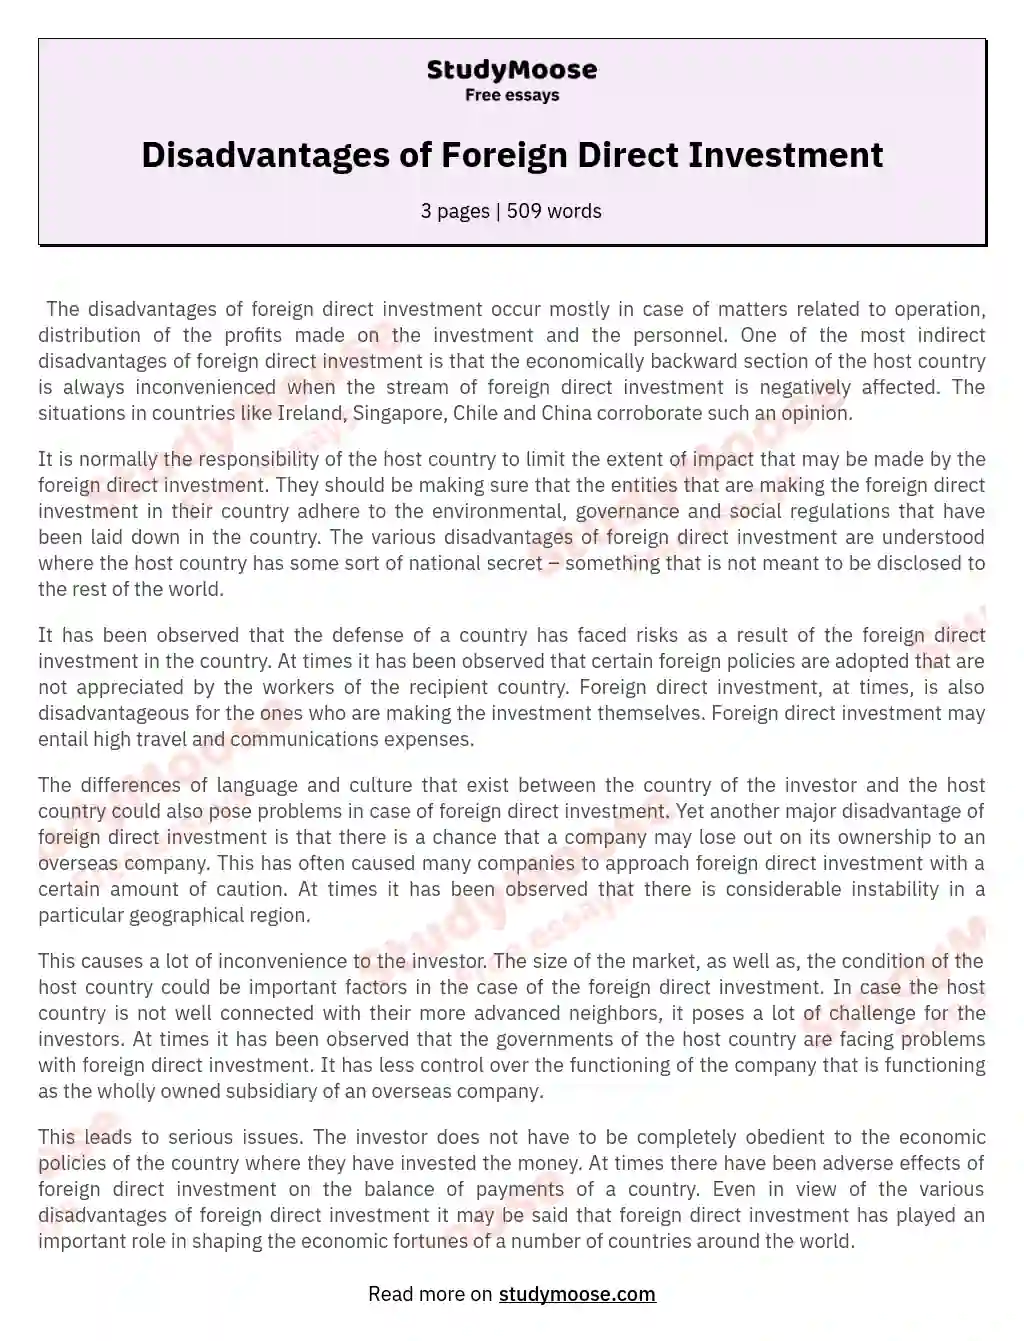 Disadvantages of Foreign Direct Investment essay